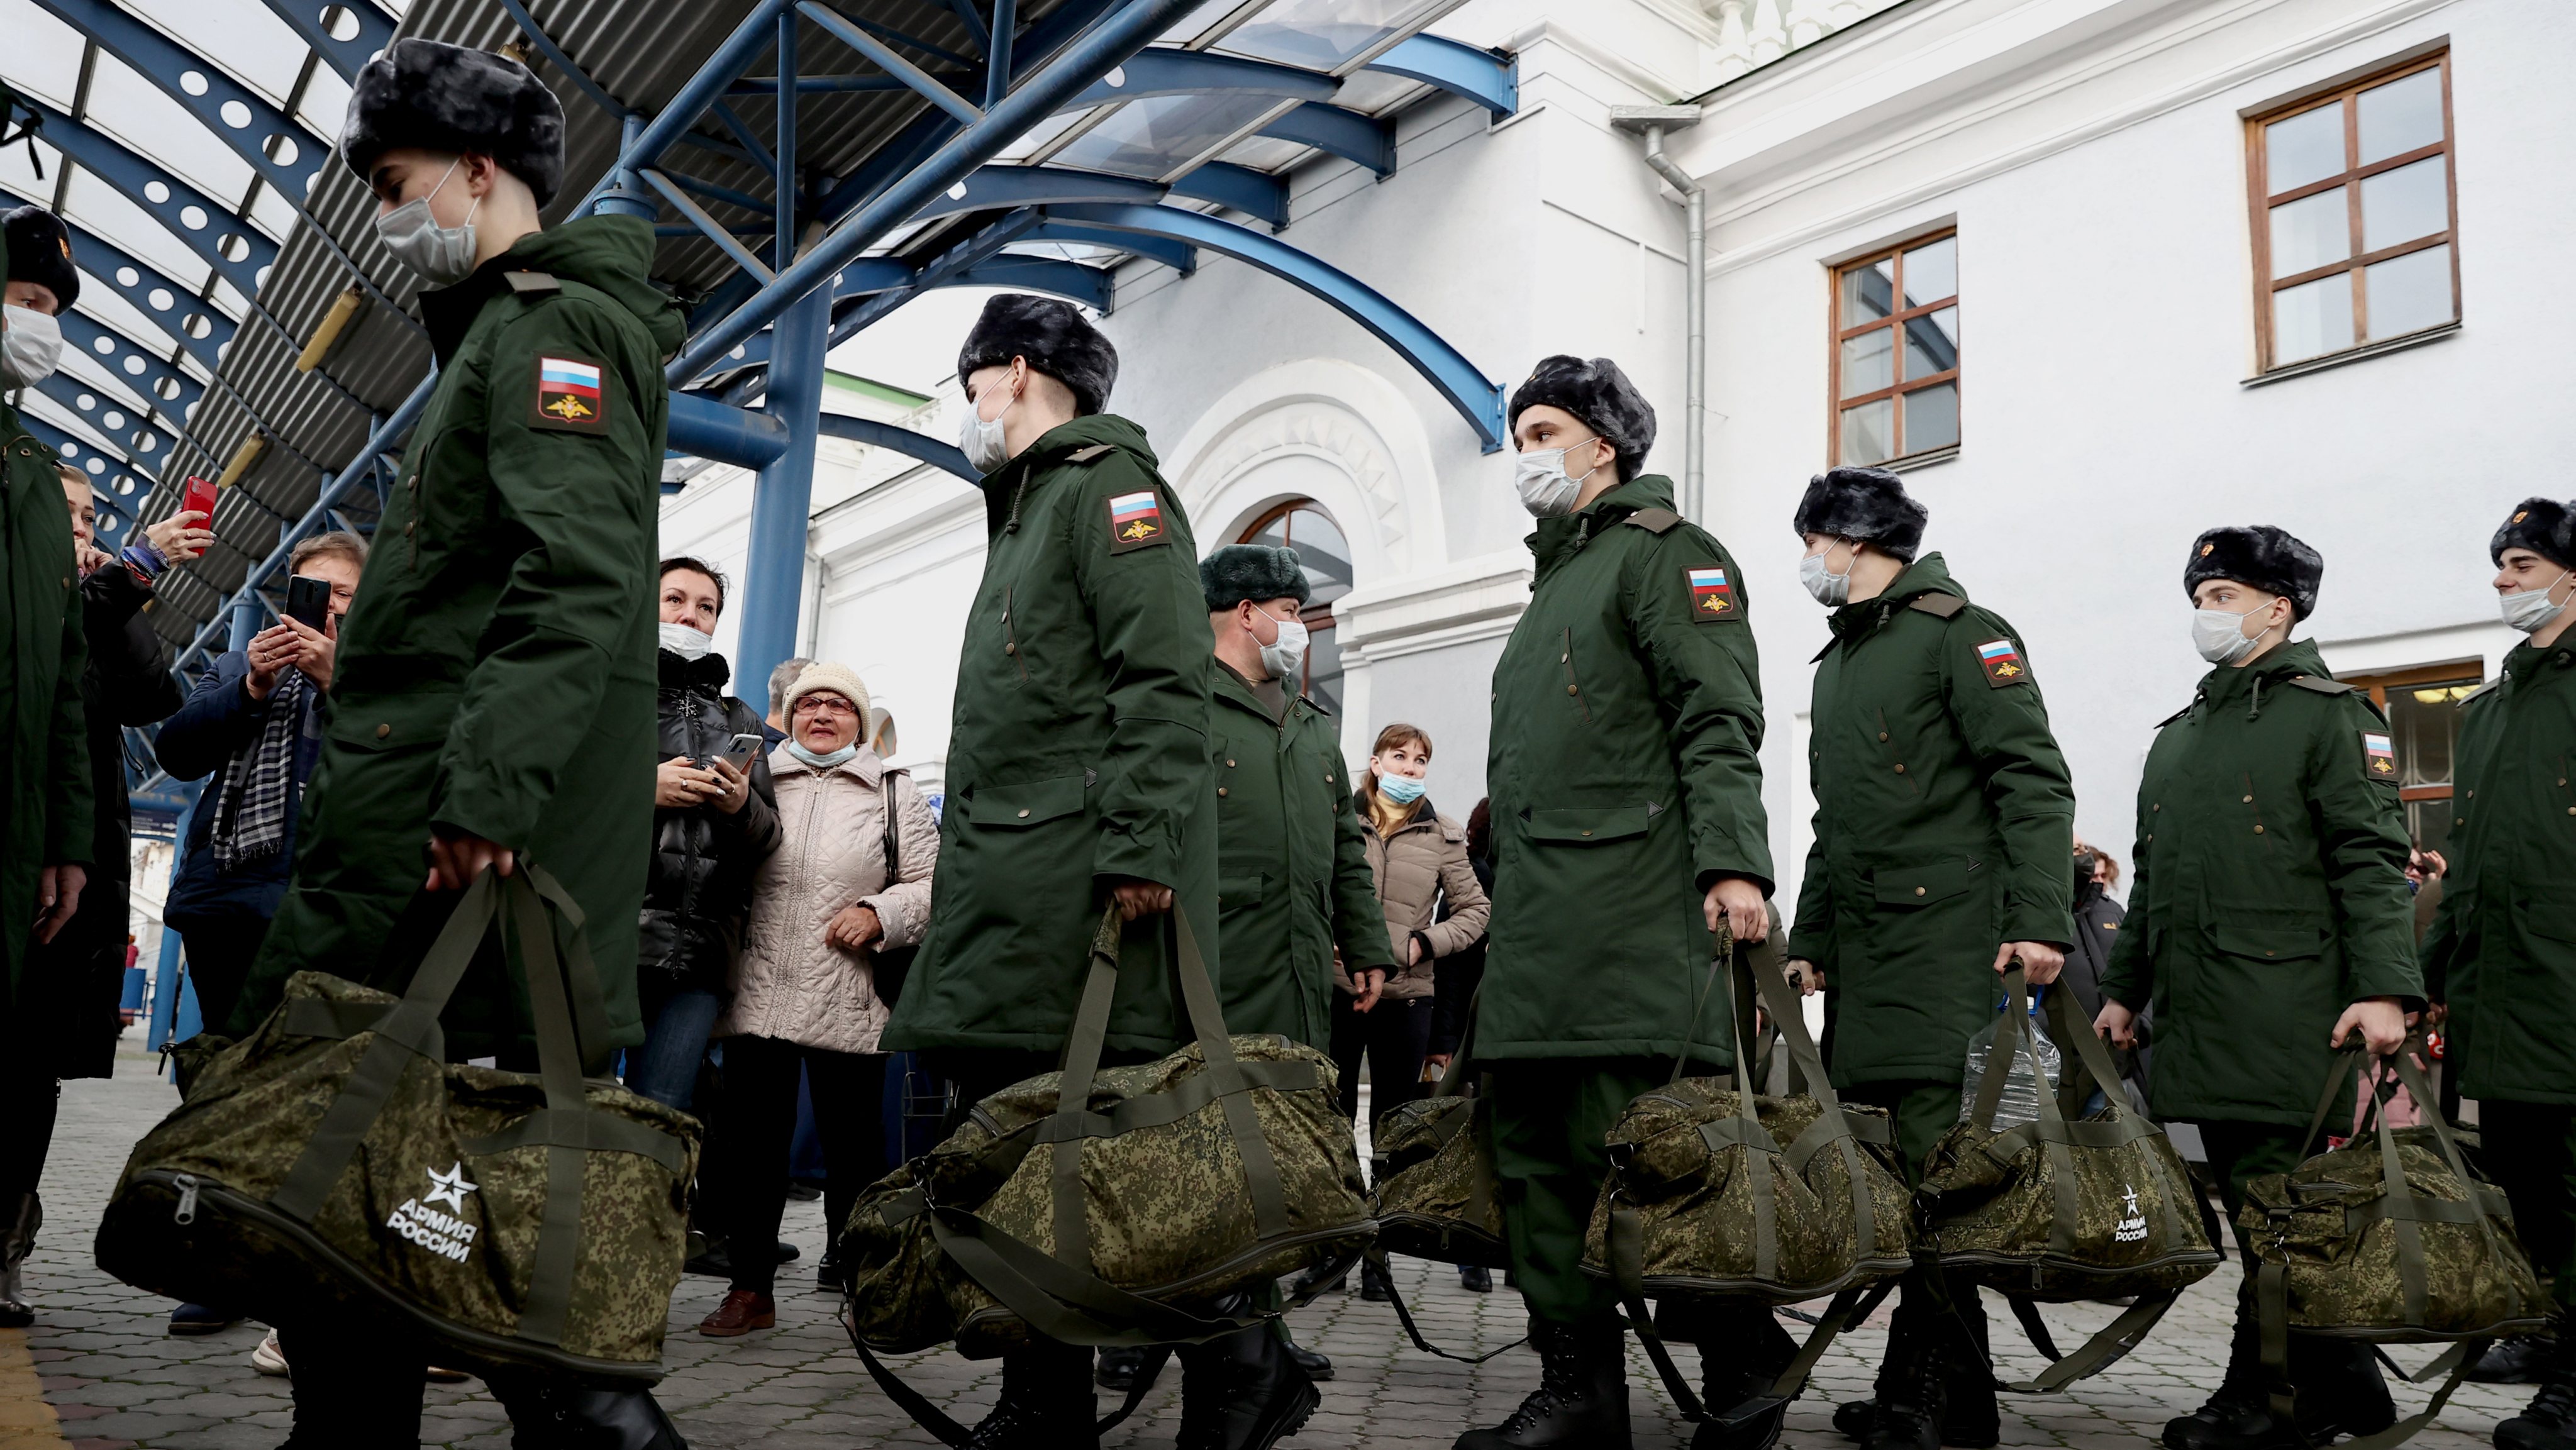 Conscripts depart for service with Russian Army